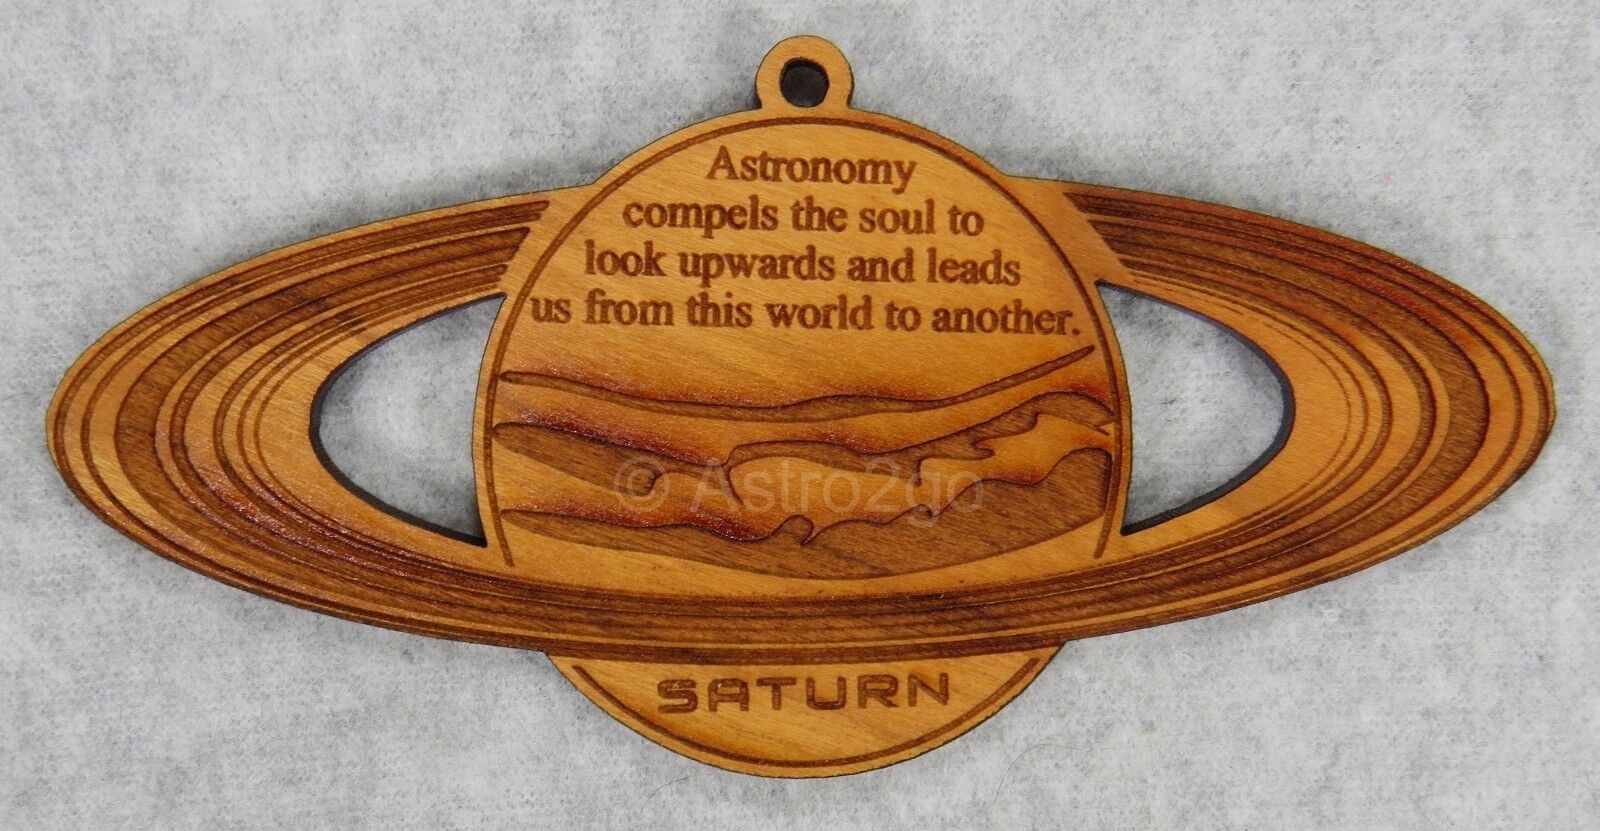 SATURN-Space Astronomy Solar System Planet Science Nestled Pines wooden ornament